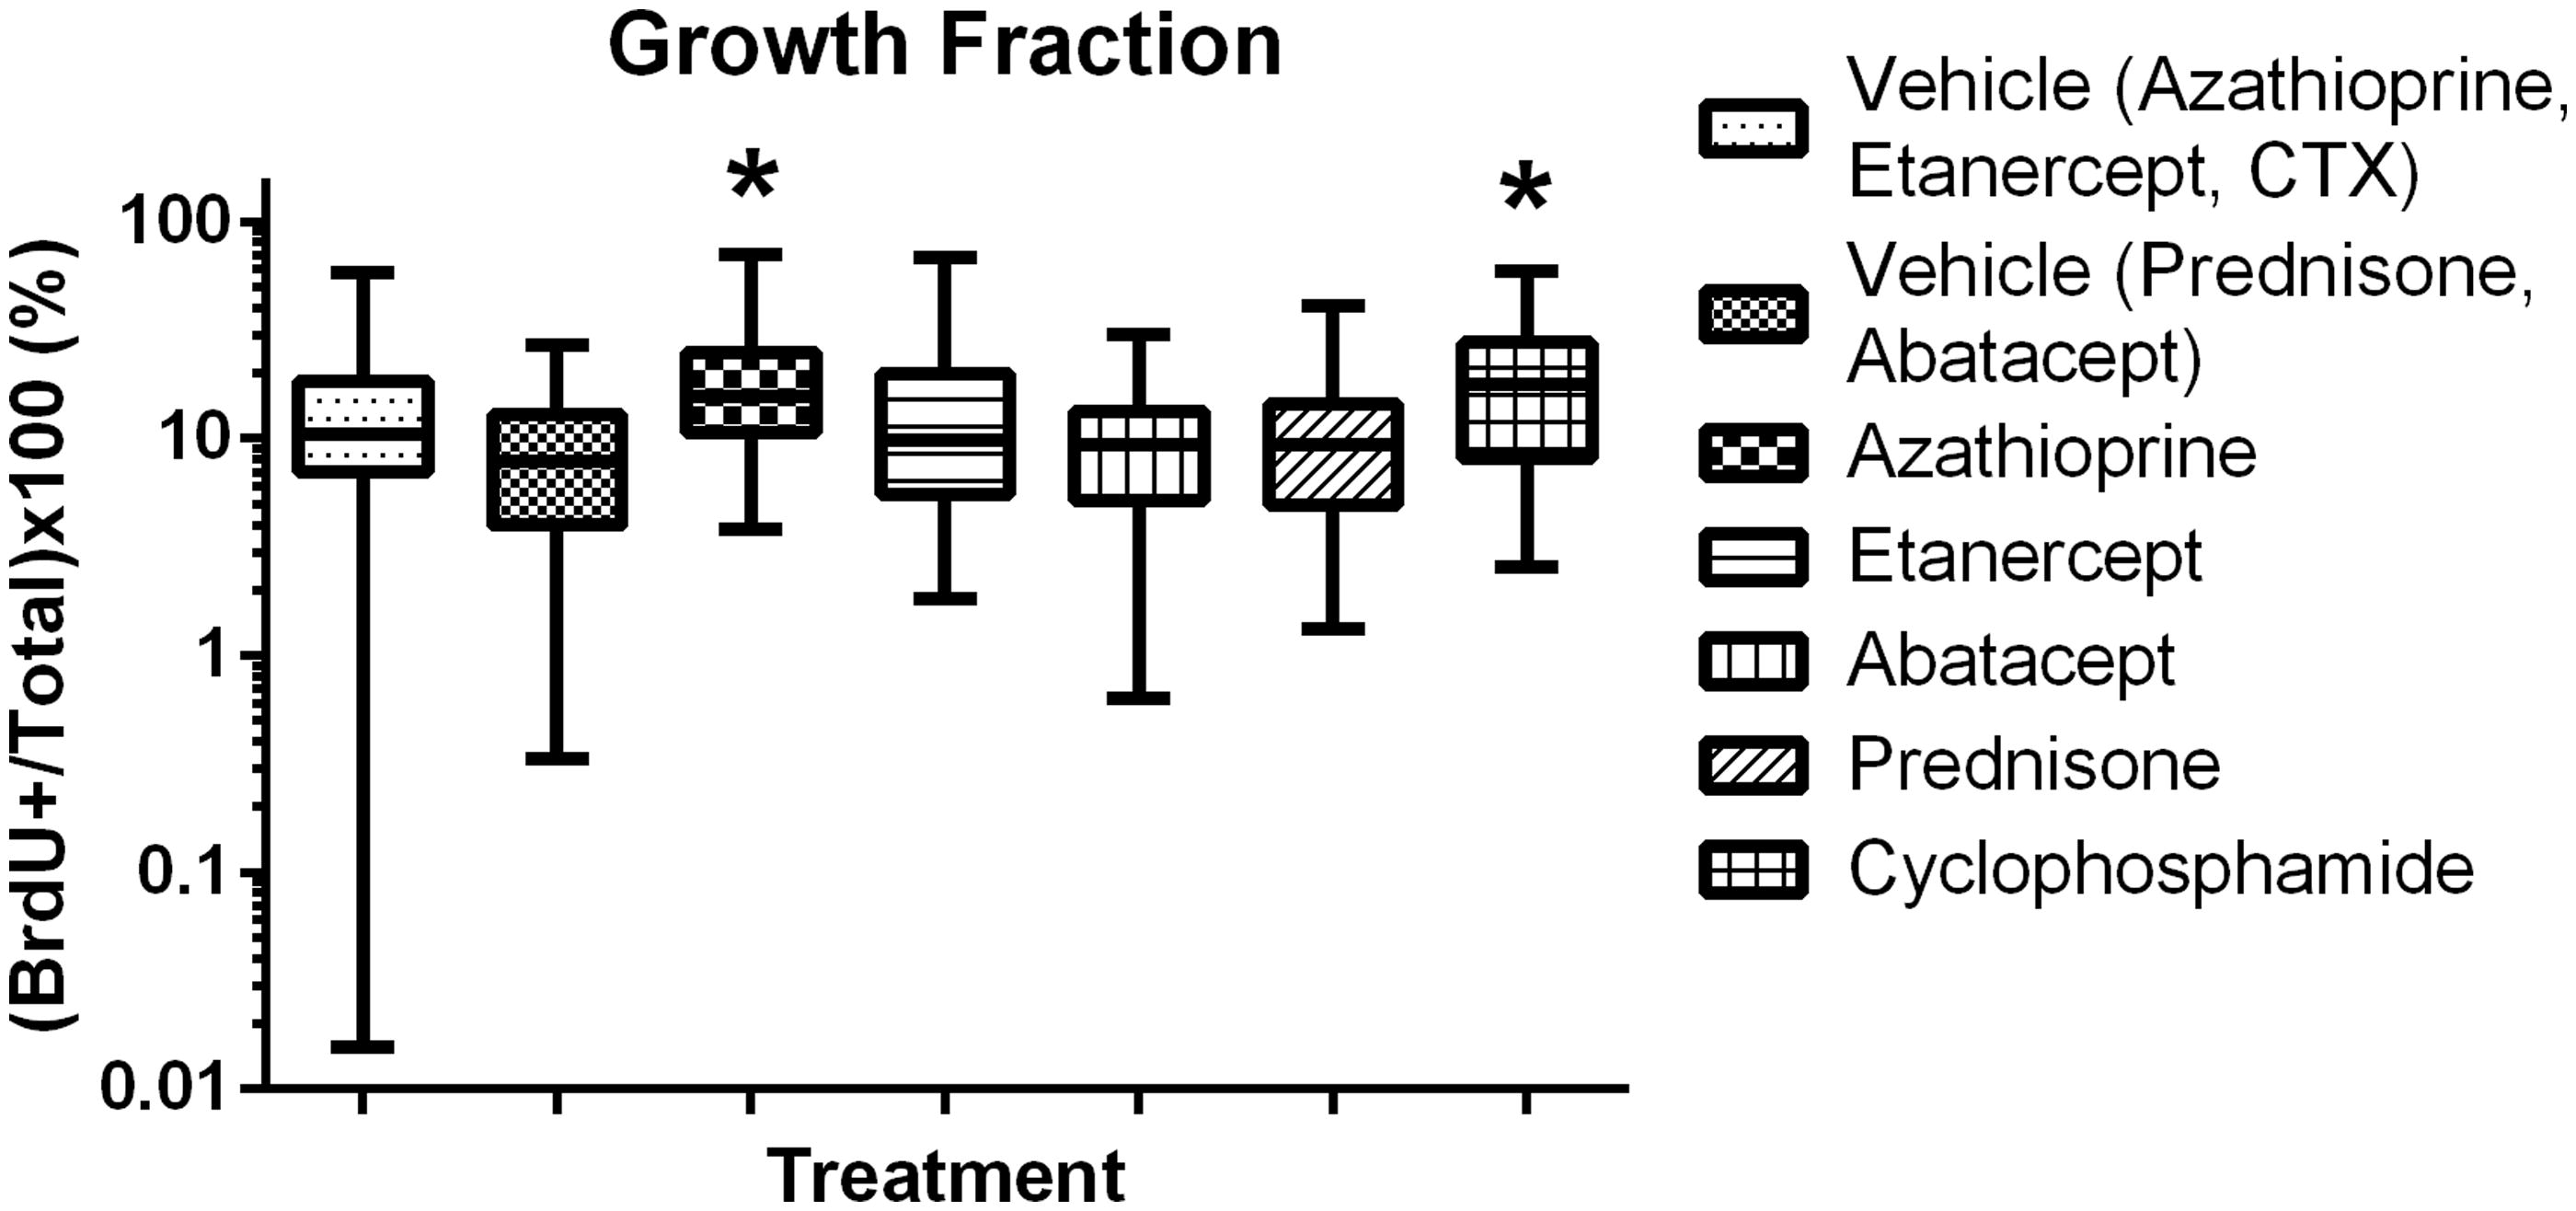 Figure 7. Growth fraction in established colonies. CTX and Azathioprine increase growth fraction in established colonies. Box and whiskers, Min to Max. *Significantly different from control (p < 0.05); n = 12/group. Treatment group always compared back to respective control.